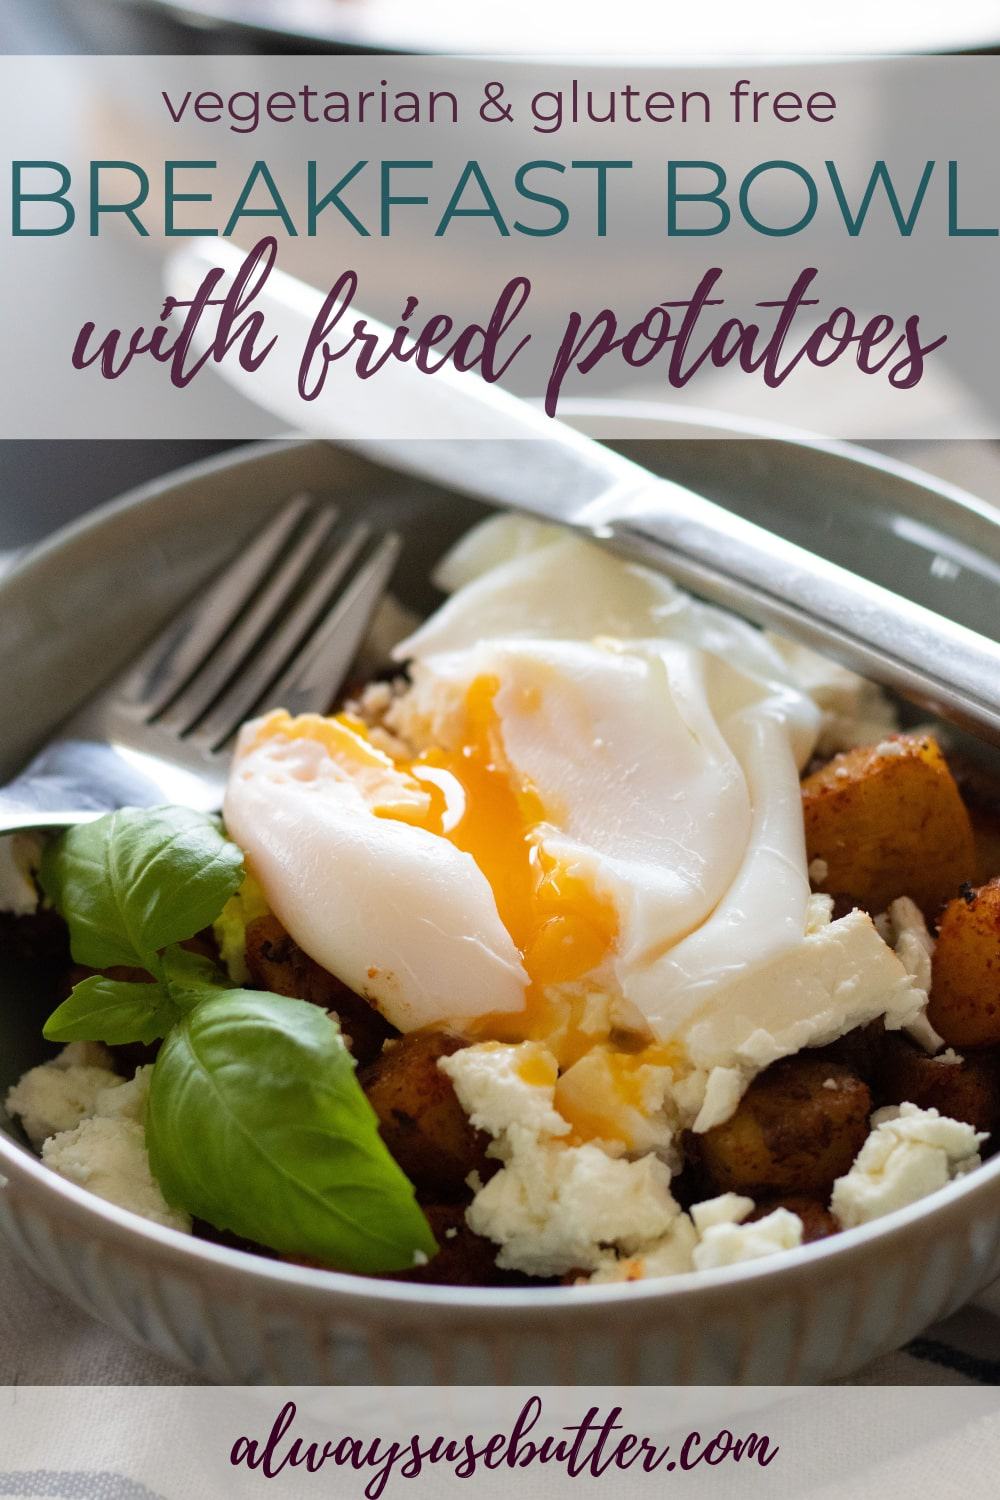 Fried Potatoes Breakfast Bowl with Feta Cheese & Poached Egg